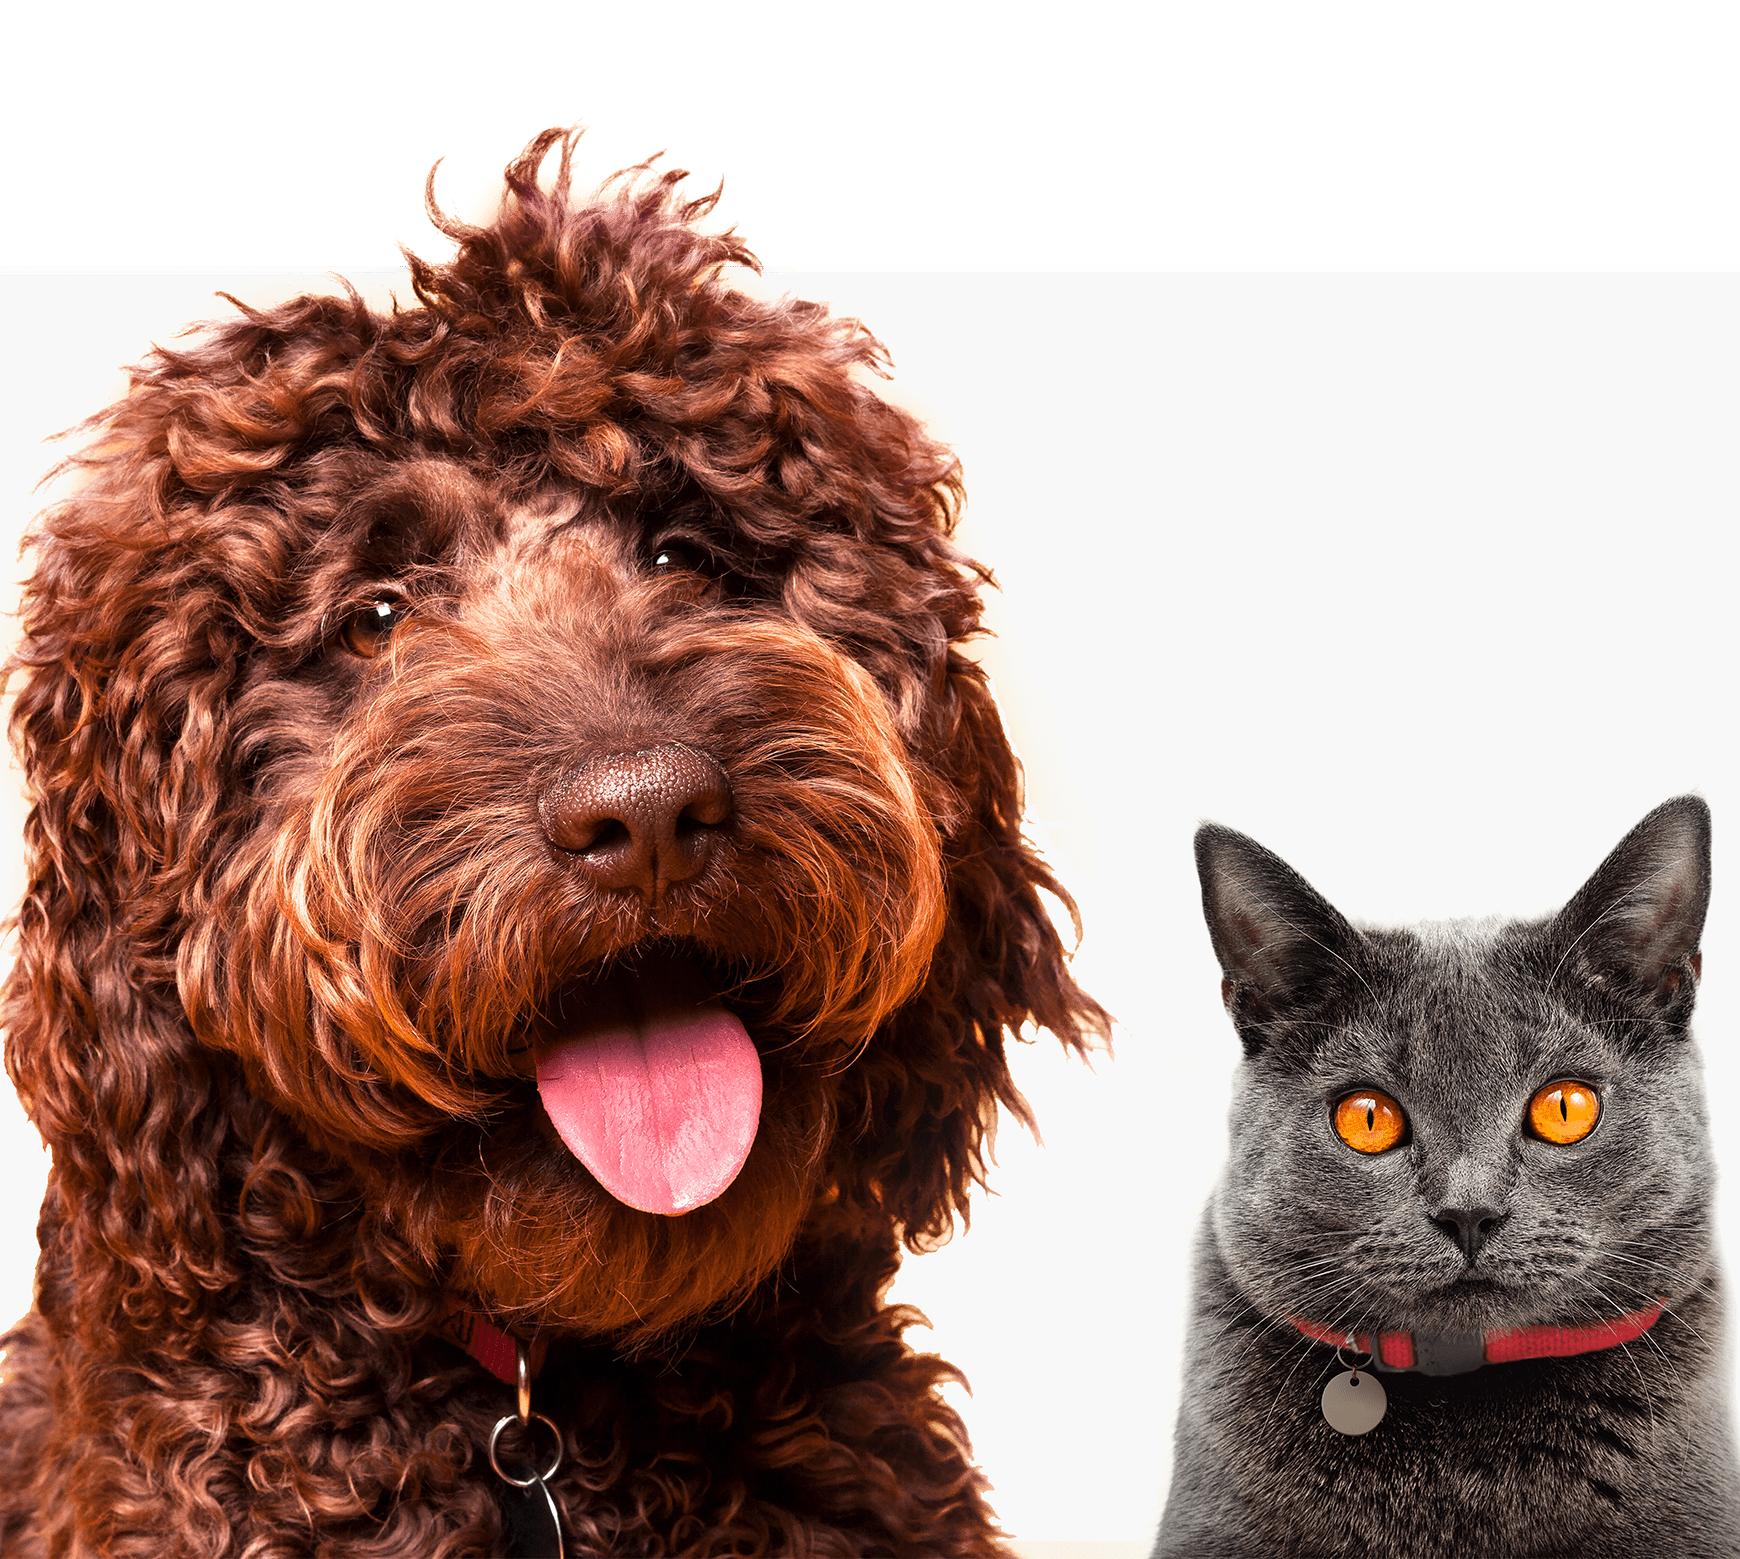 Pet Insurance Florida. Compare Quotes from Top Florida Pet Insurance Companies
